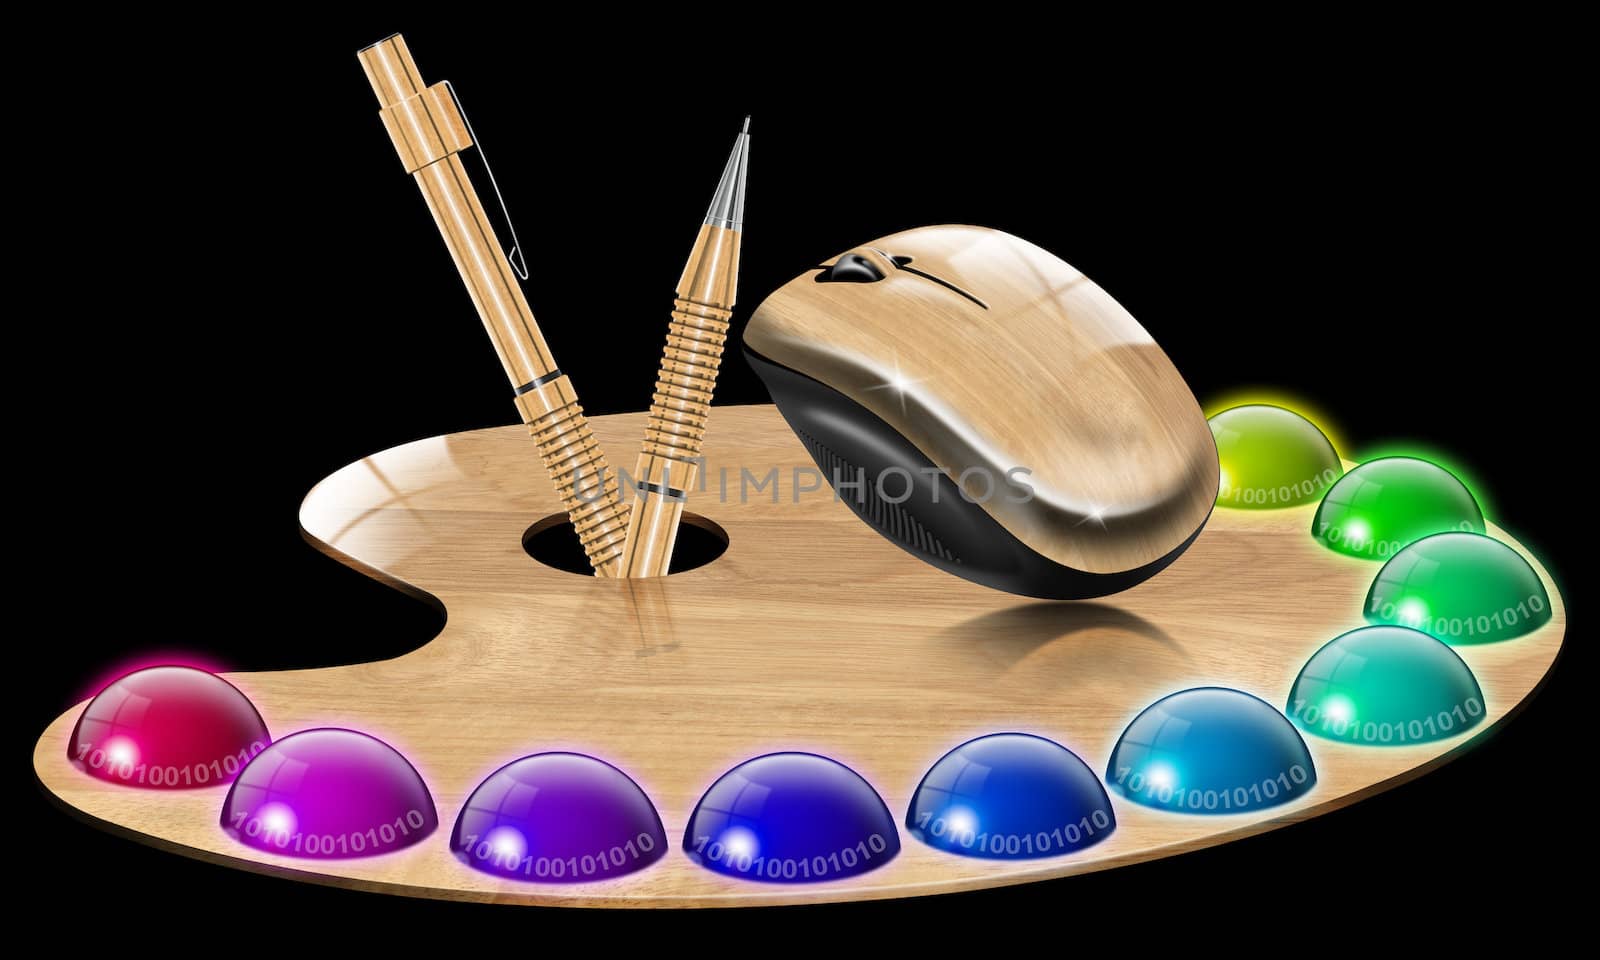 Illustration with a painter's palette of wood with multicolored balls, wood mouse and propelling pencils on black background